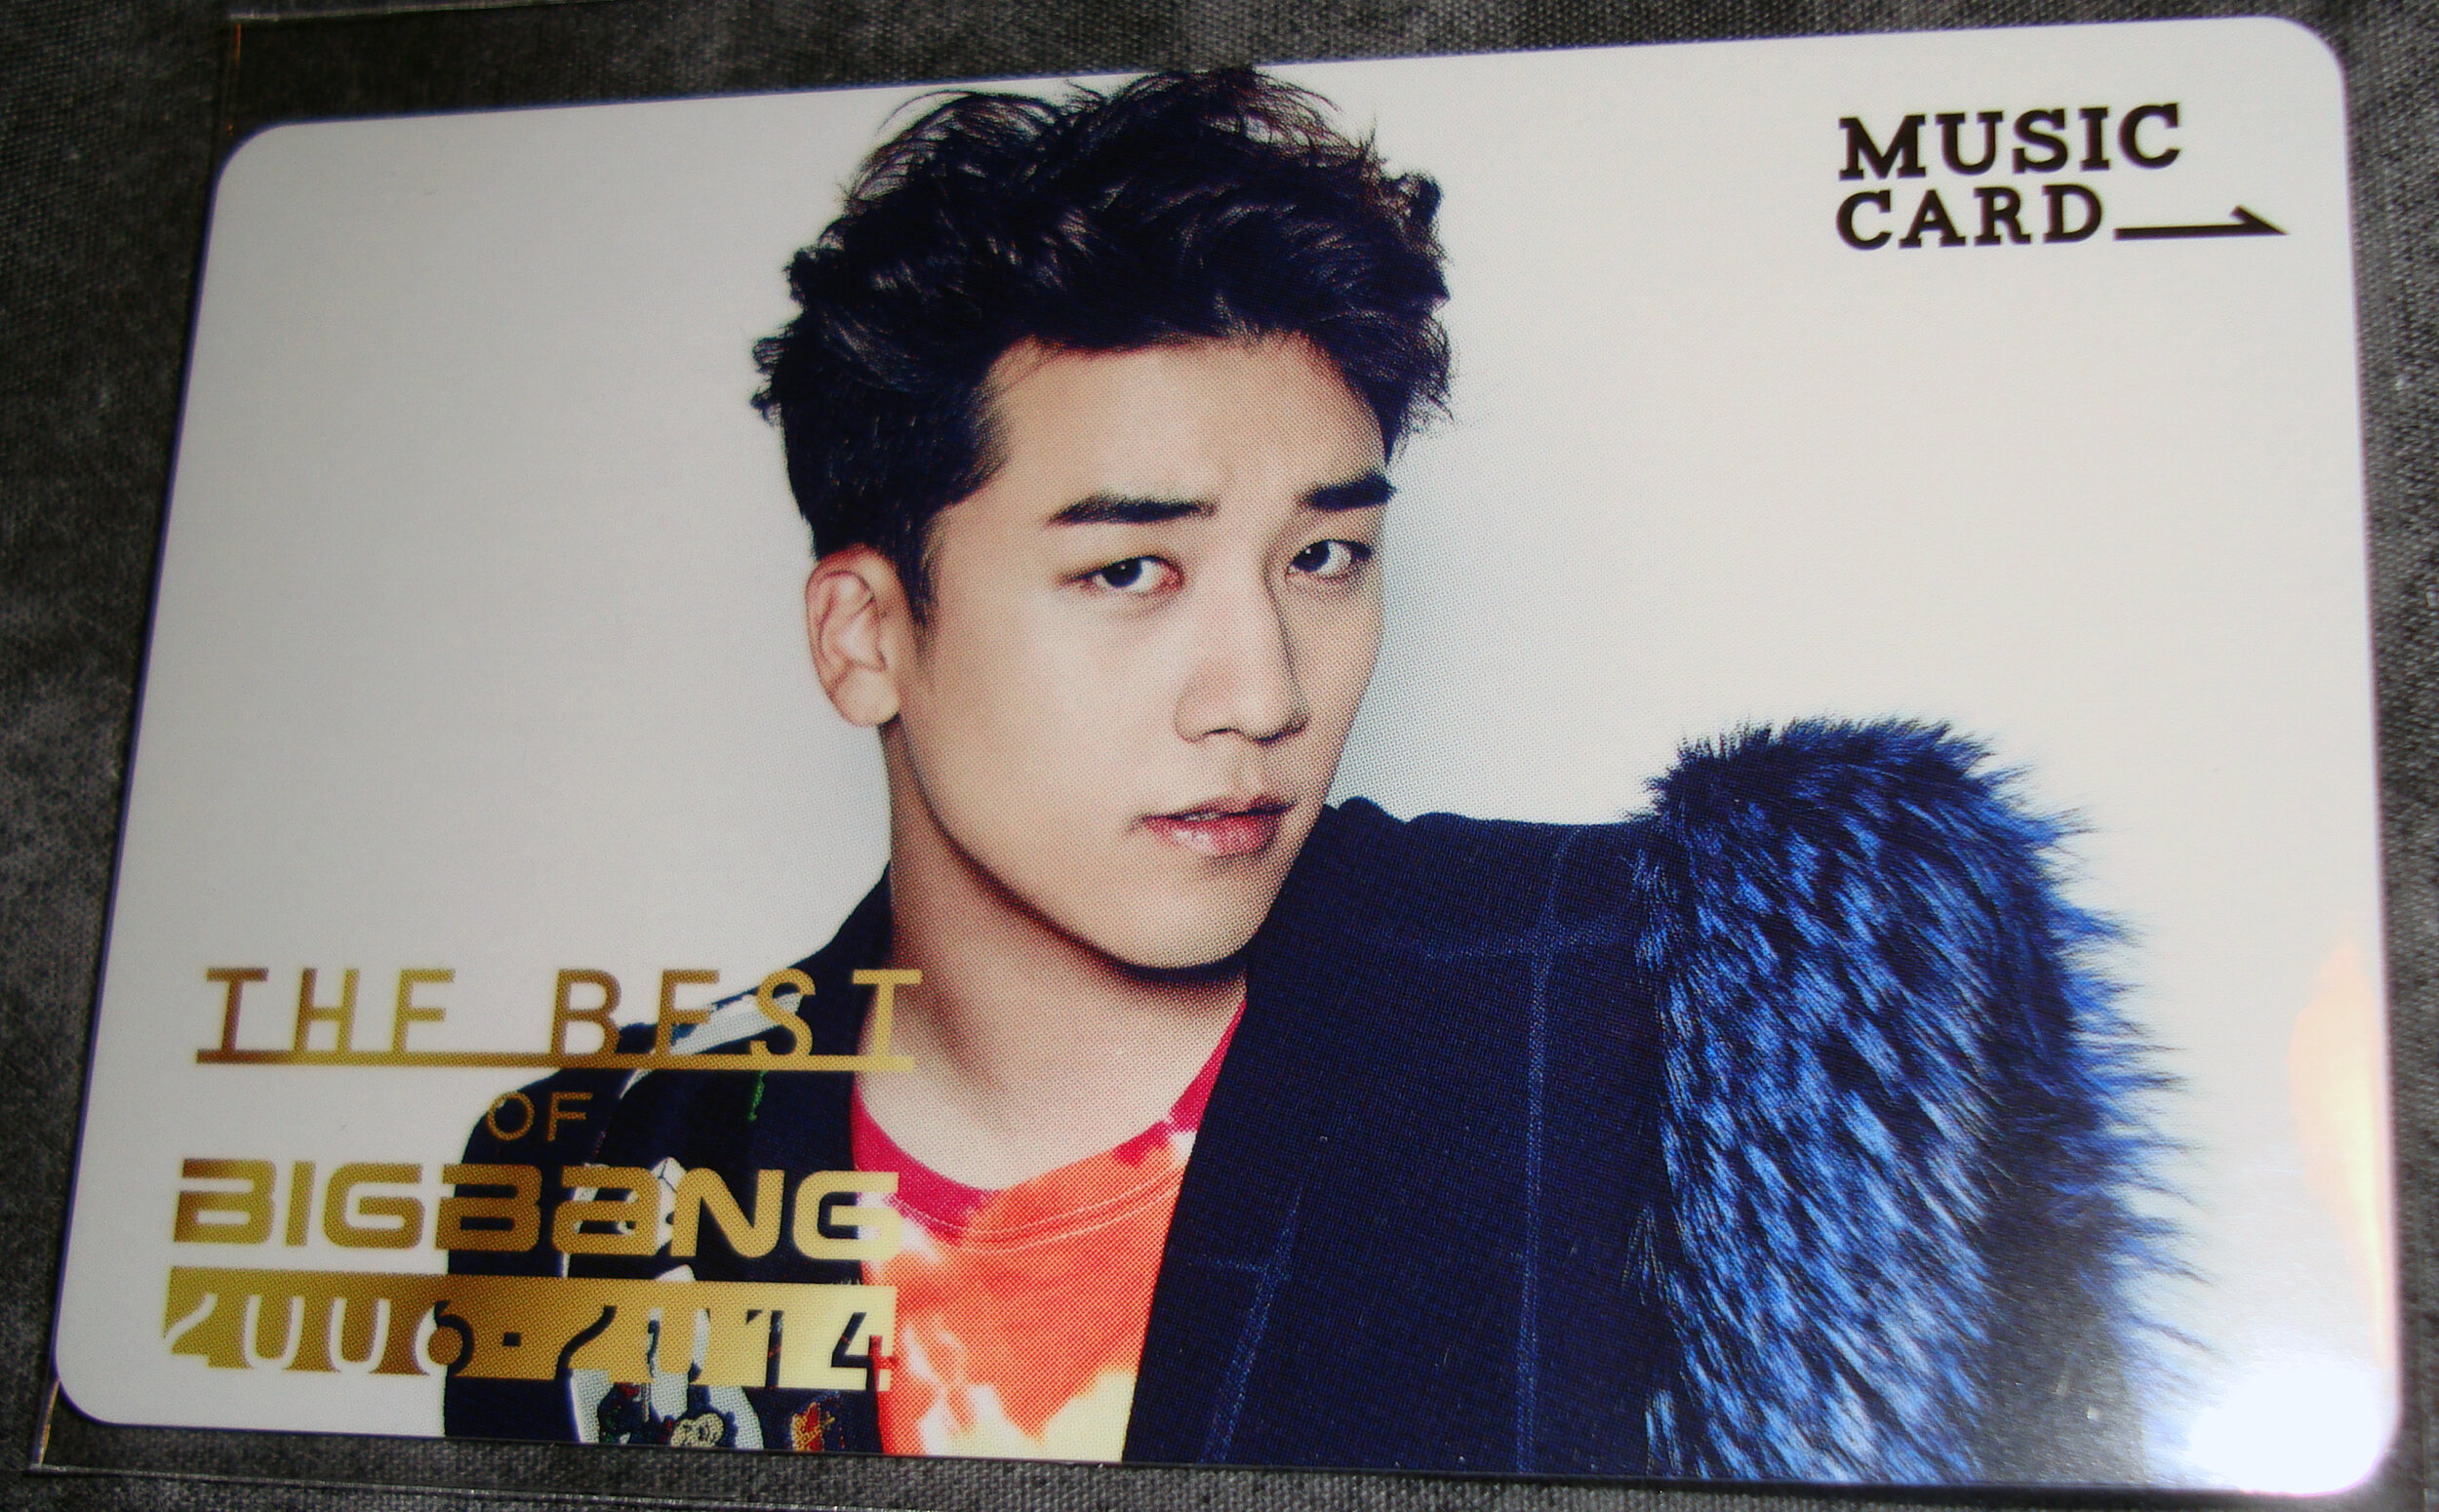 2014 - The Best of BIGBANG 06-14 - Set of 7 Music Cards — my 